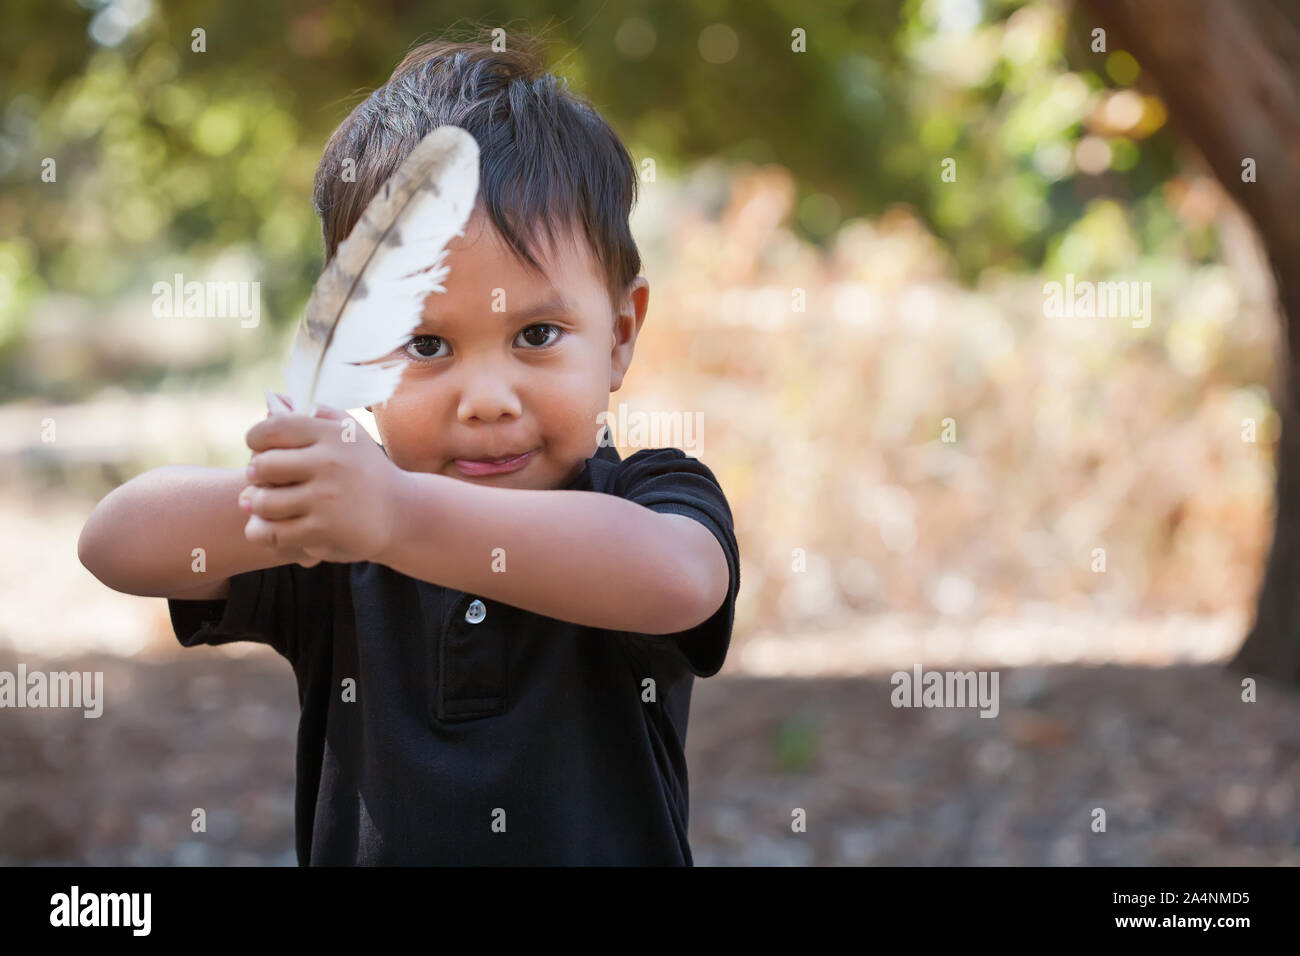 A little boy holding a birds feather like a sword in a crown guard position. Stock Photo